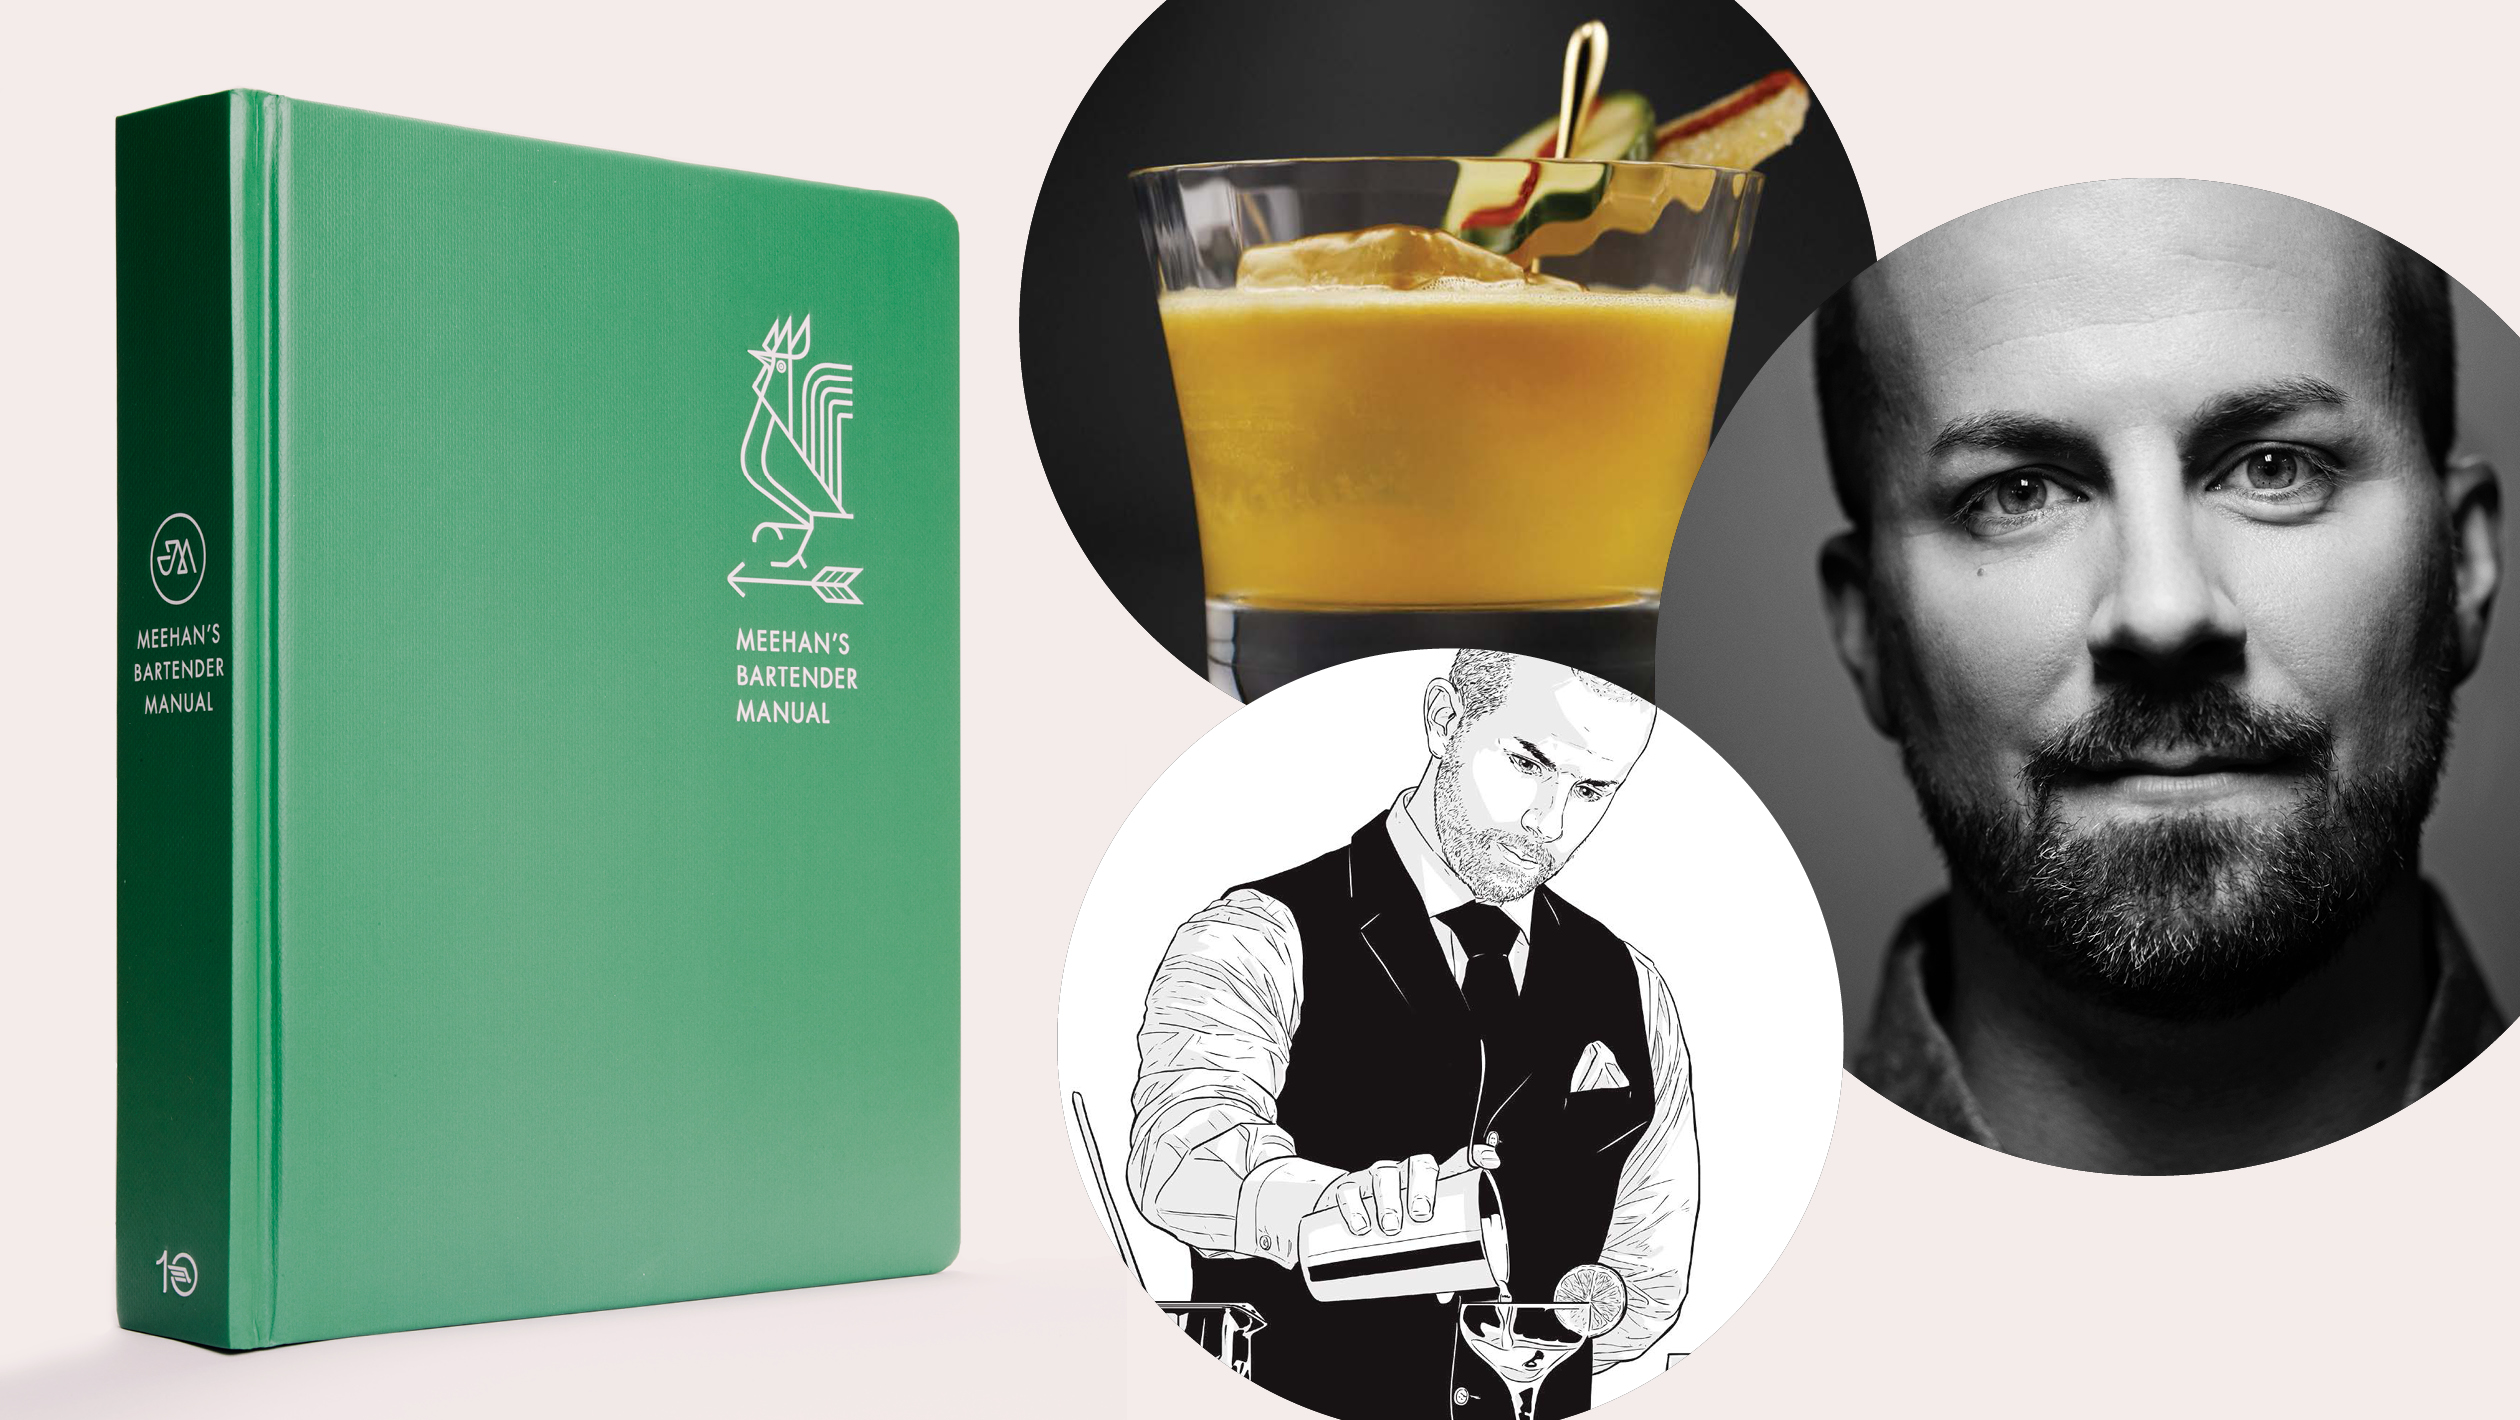 The Essential Bar Book for Home Mixologists: Tools, Techniques, and Spirits to Master Cocktails [Book]